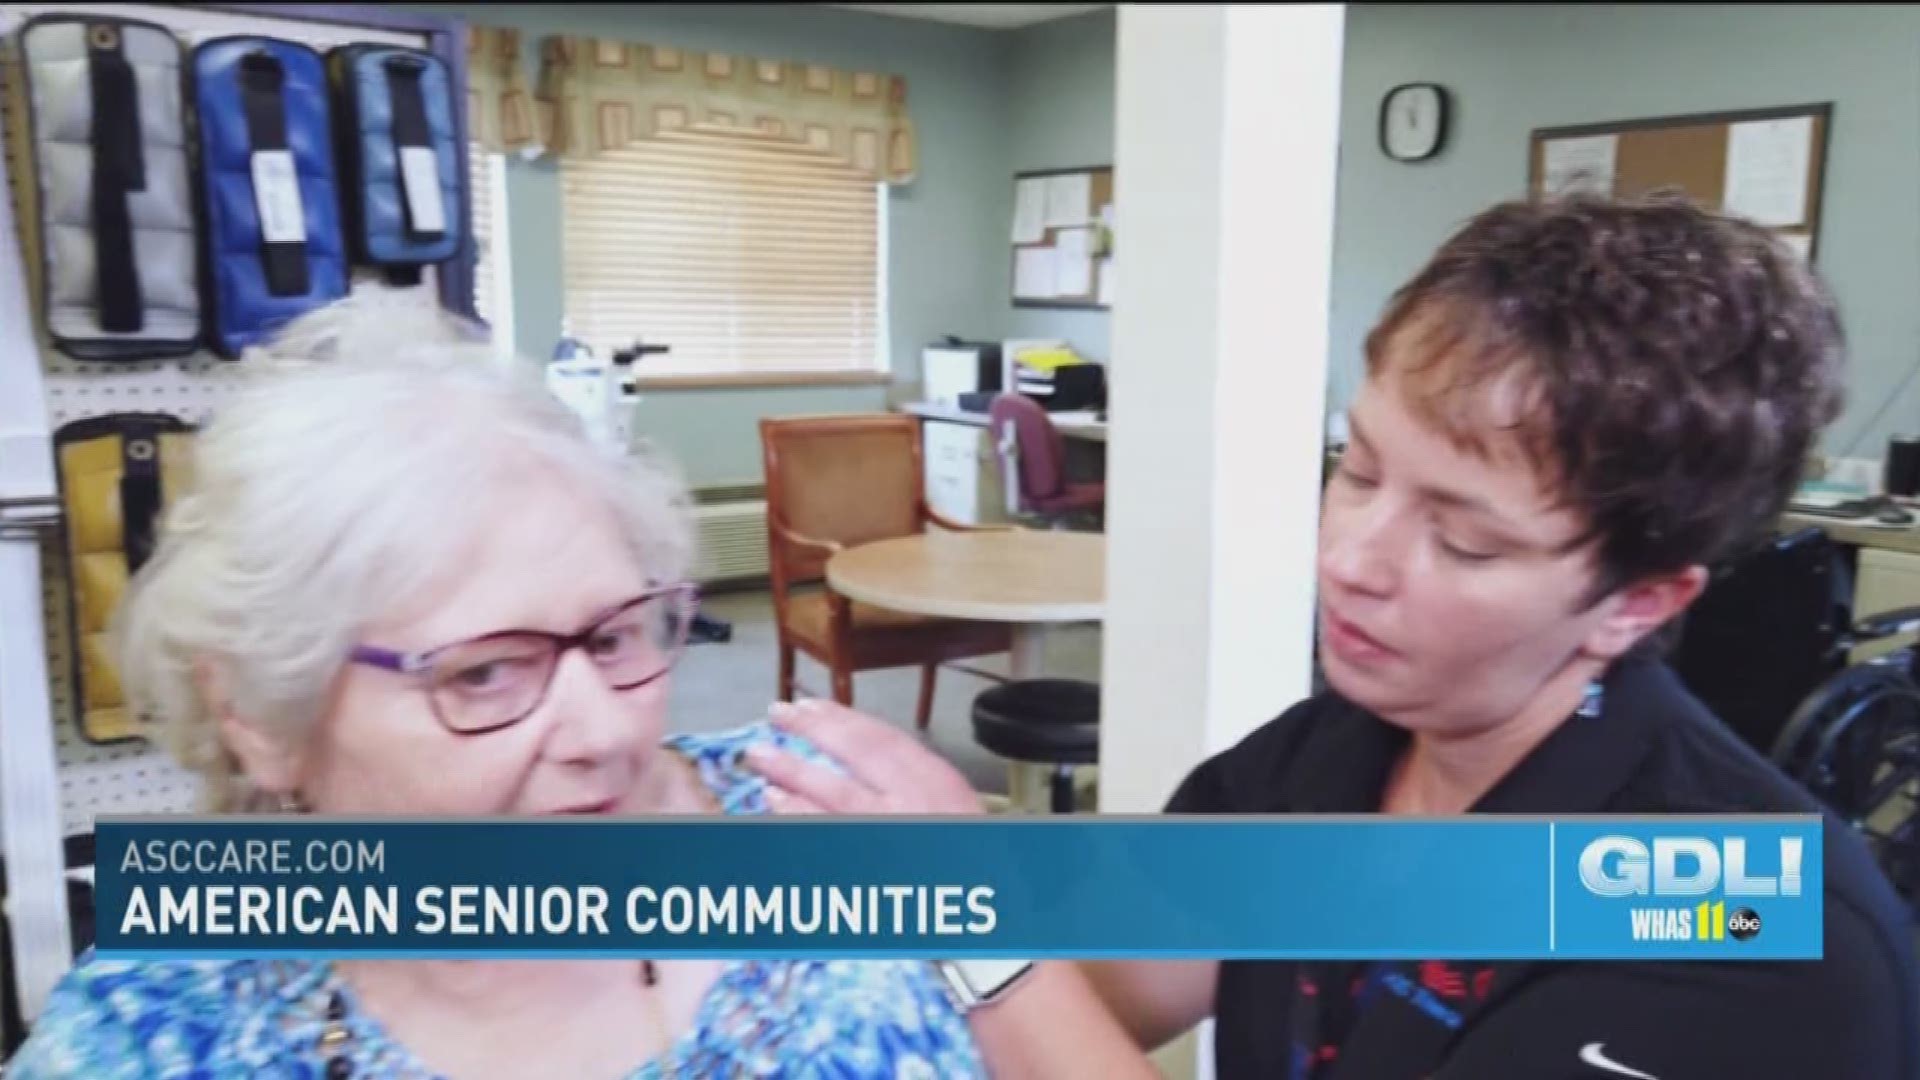 For more information on American Senior Communities, go to AscCare.com.